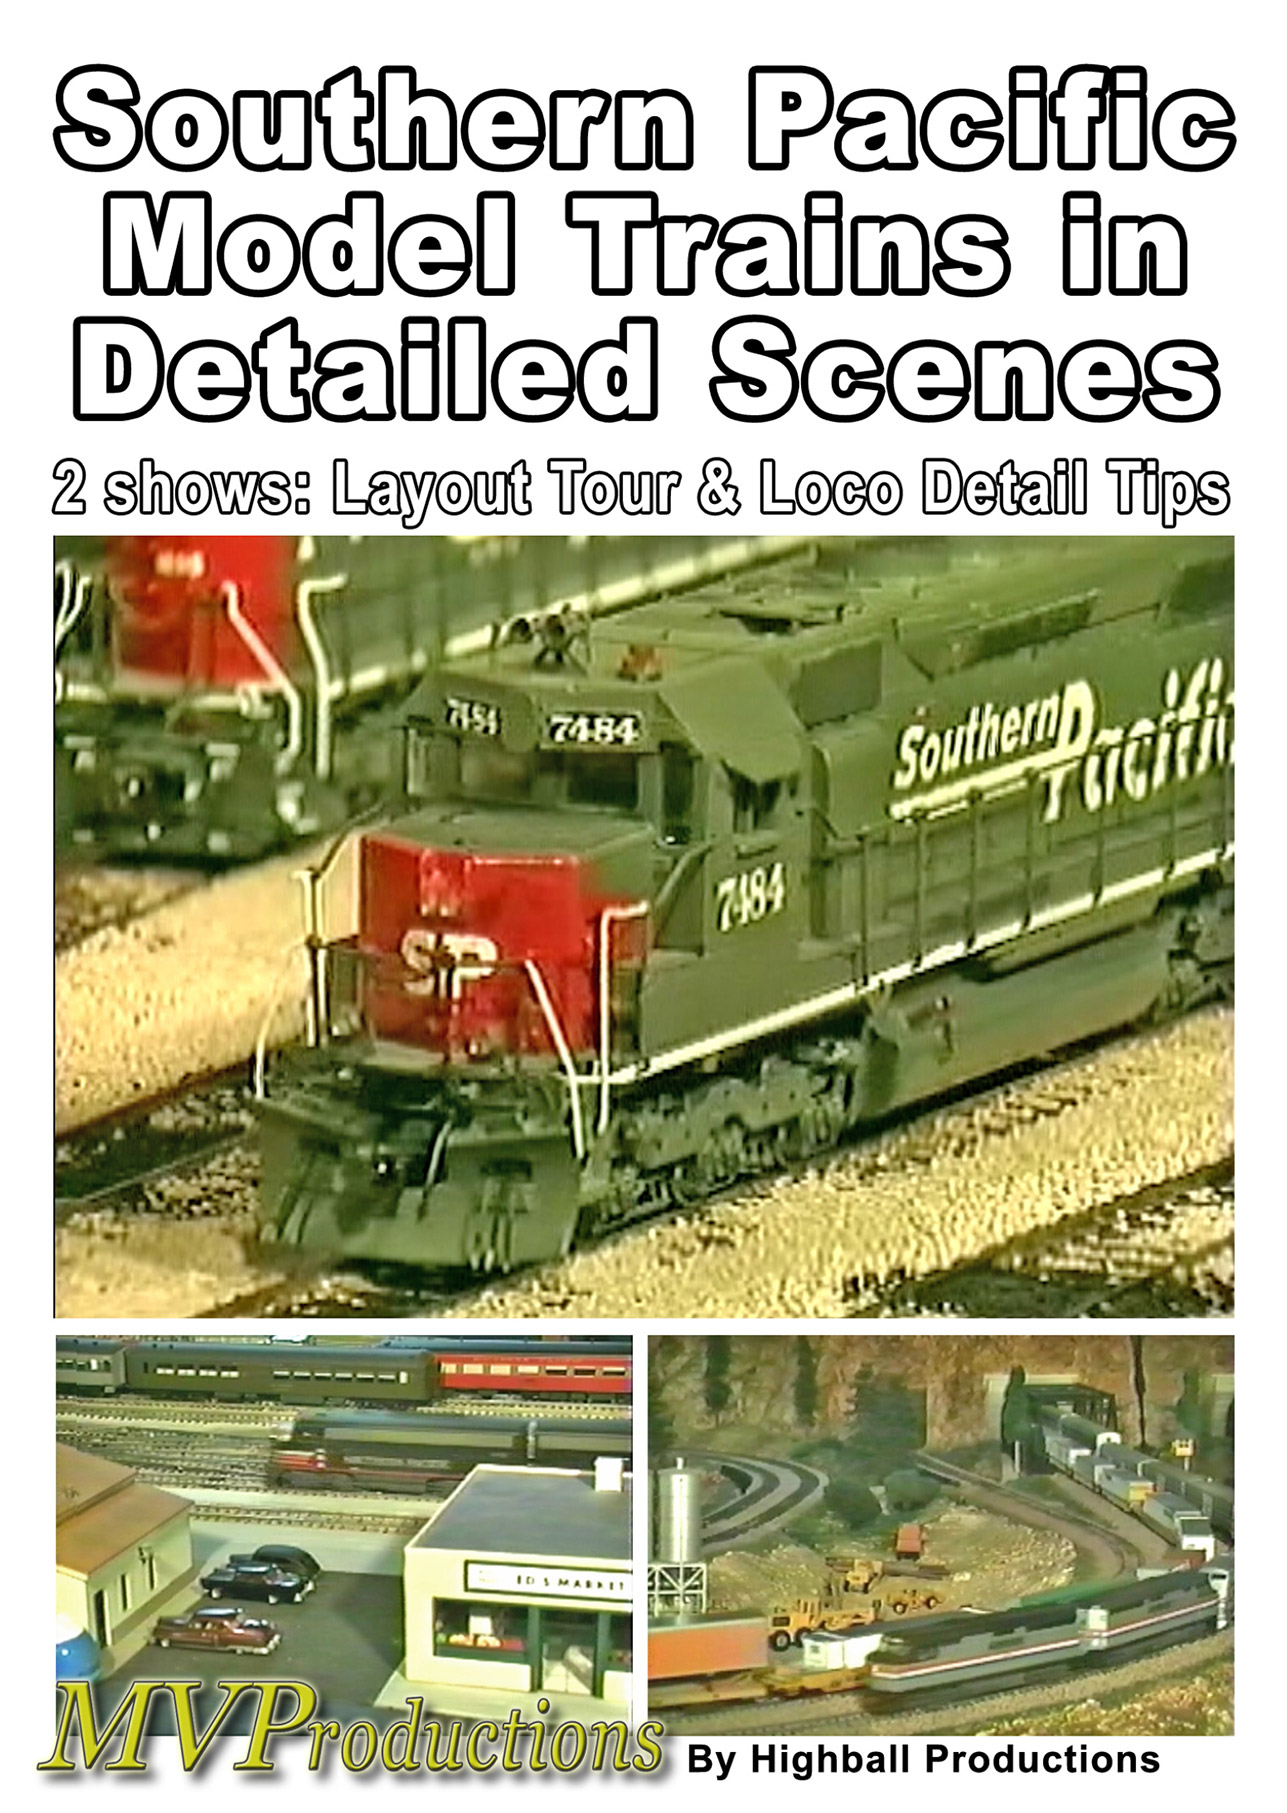 Southern Pacific Model Trains in Detailed Scenes Midwest Video Productions MVMRC 601577880059